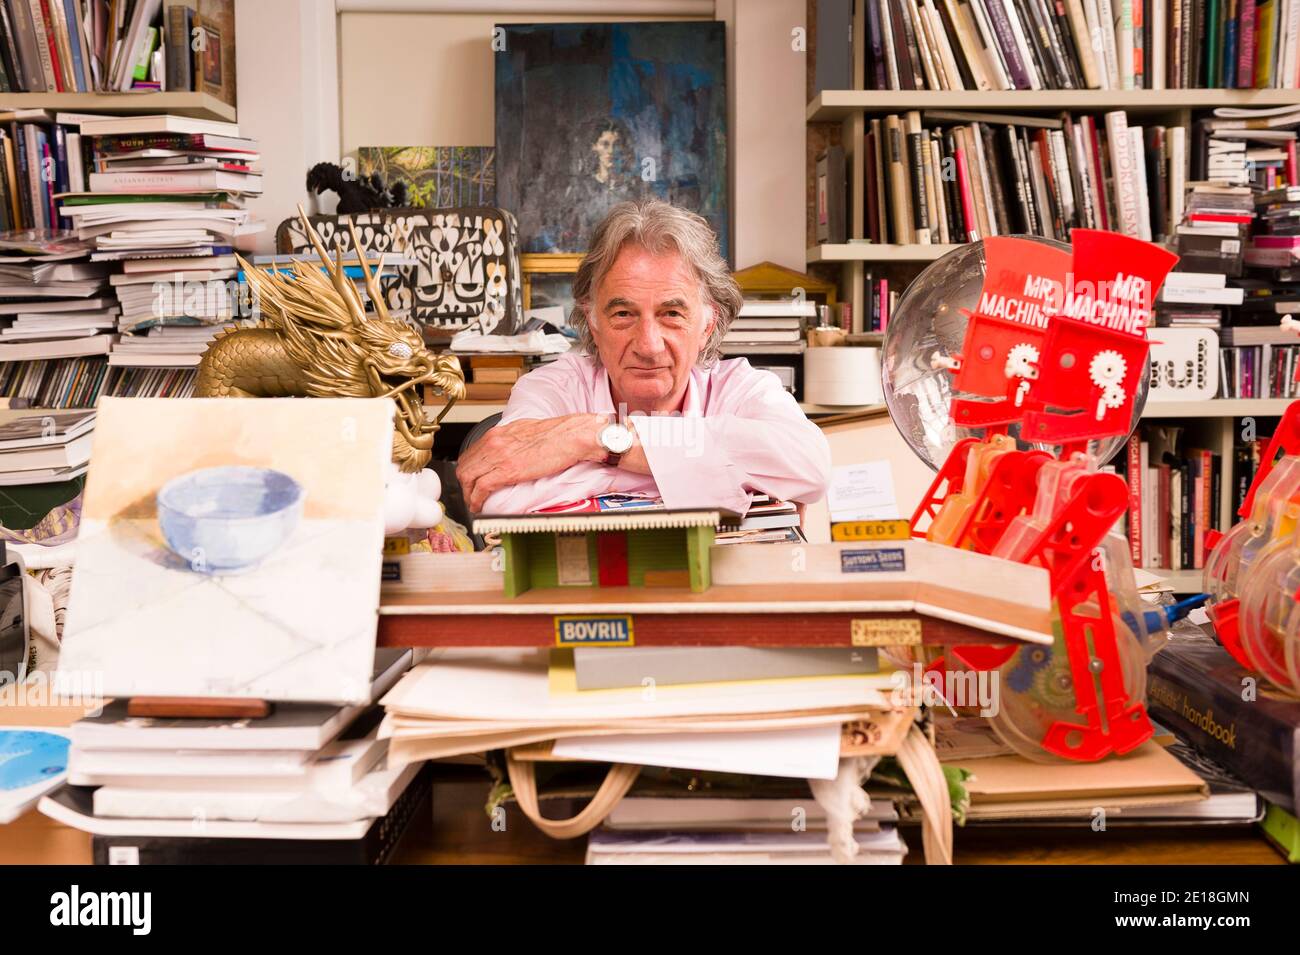 Sir Paul Smith fashion designer photographed in his office, Covent Garden,  London, UK. 2 Jun 2011 Stock Photo - Alamy